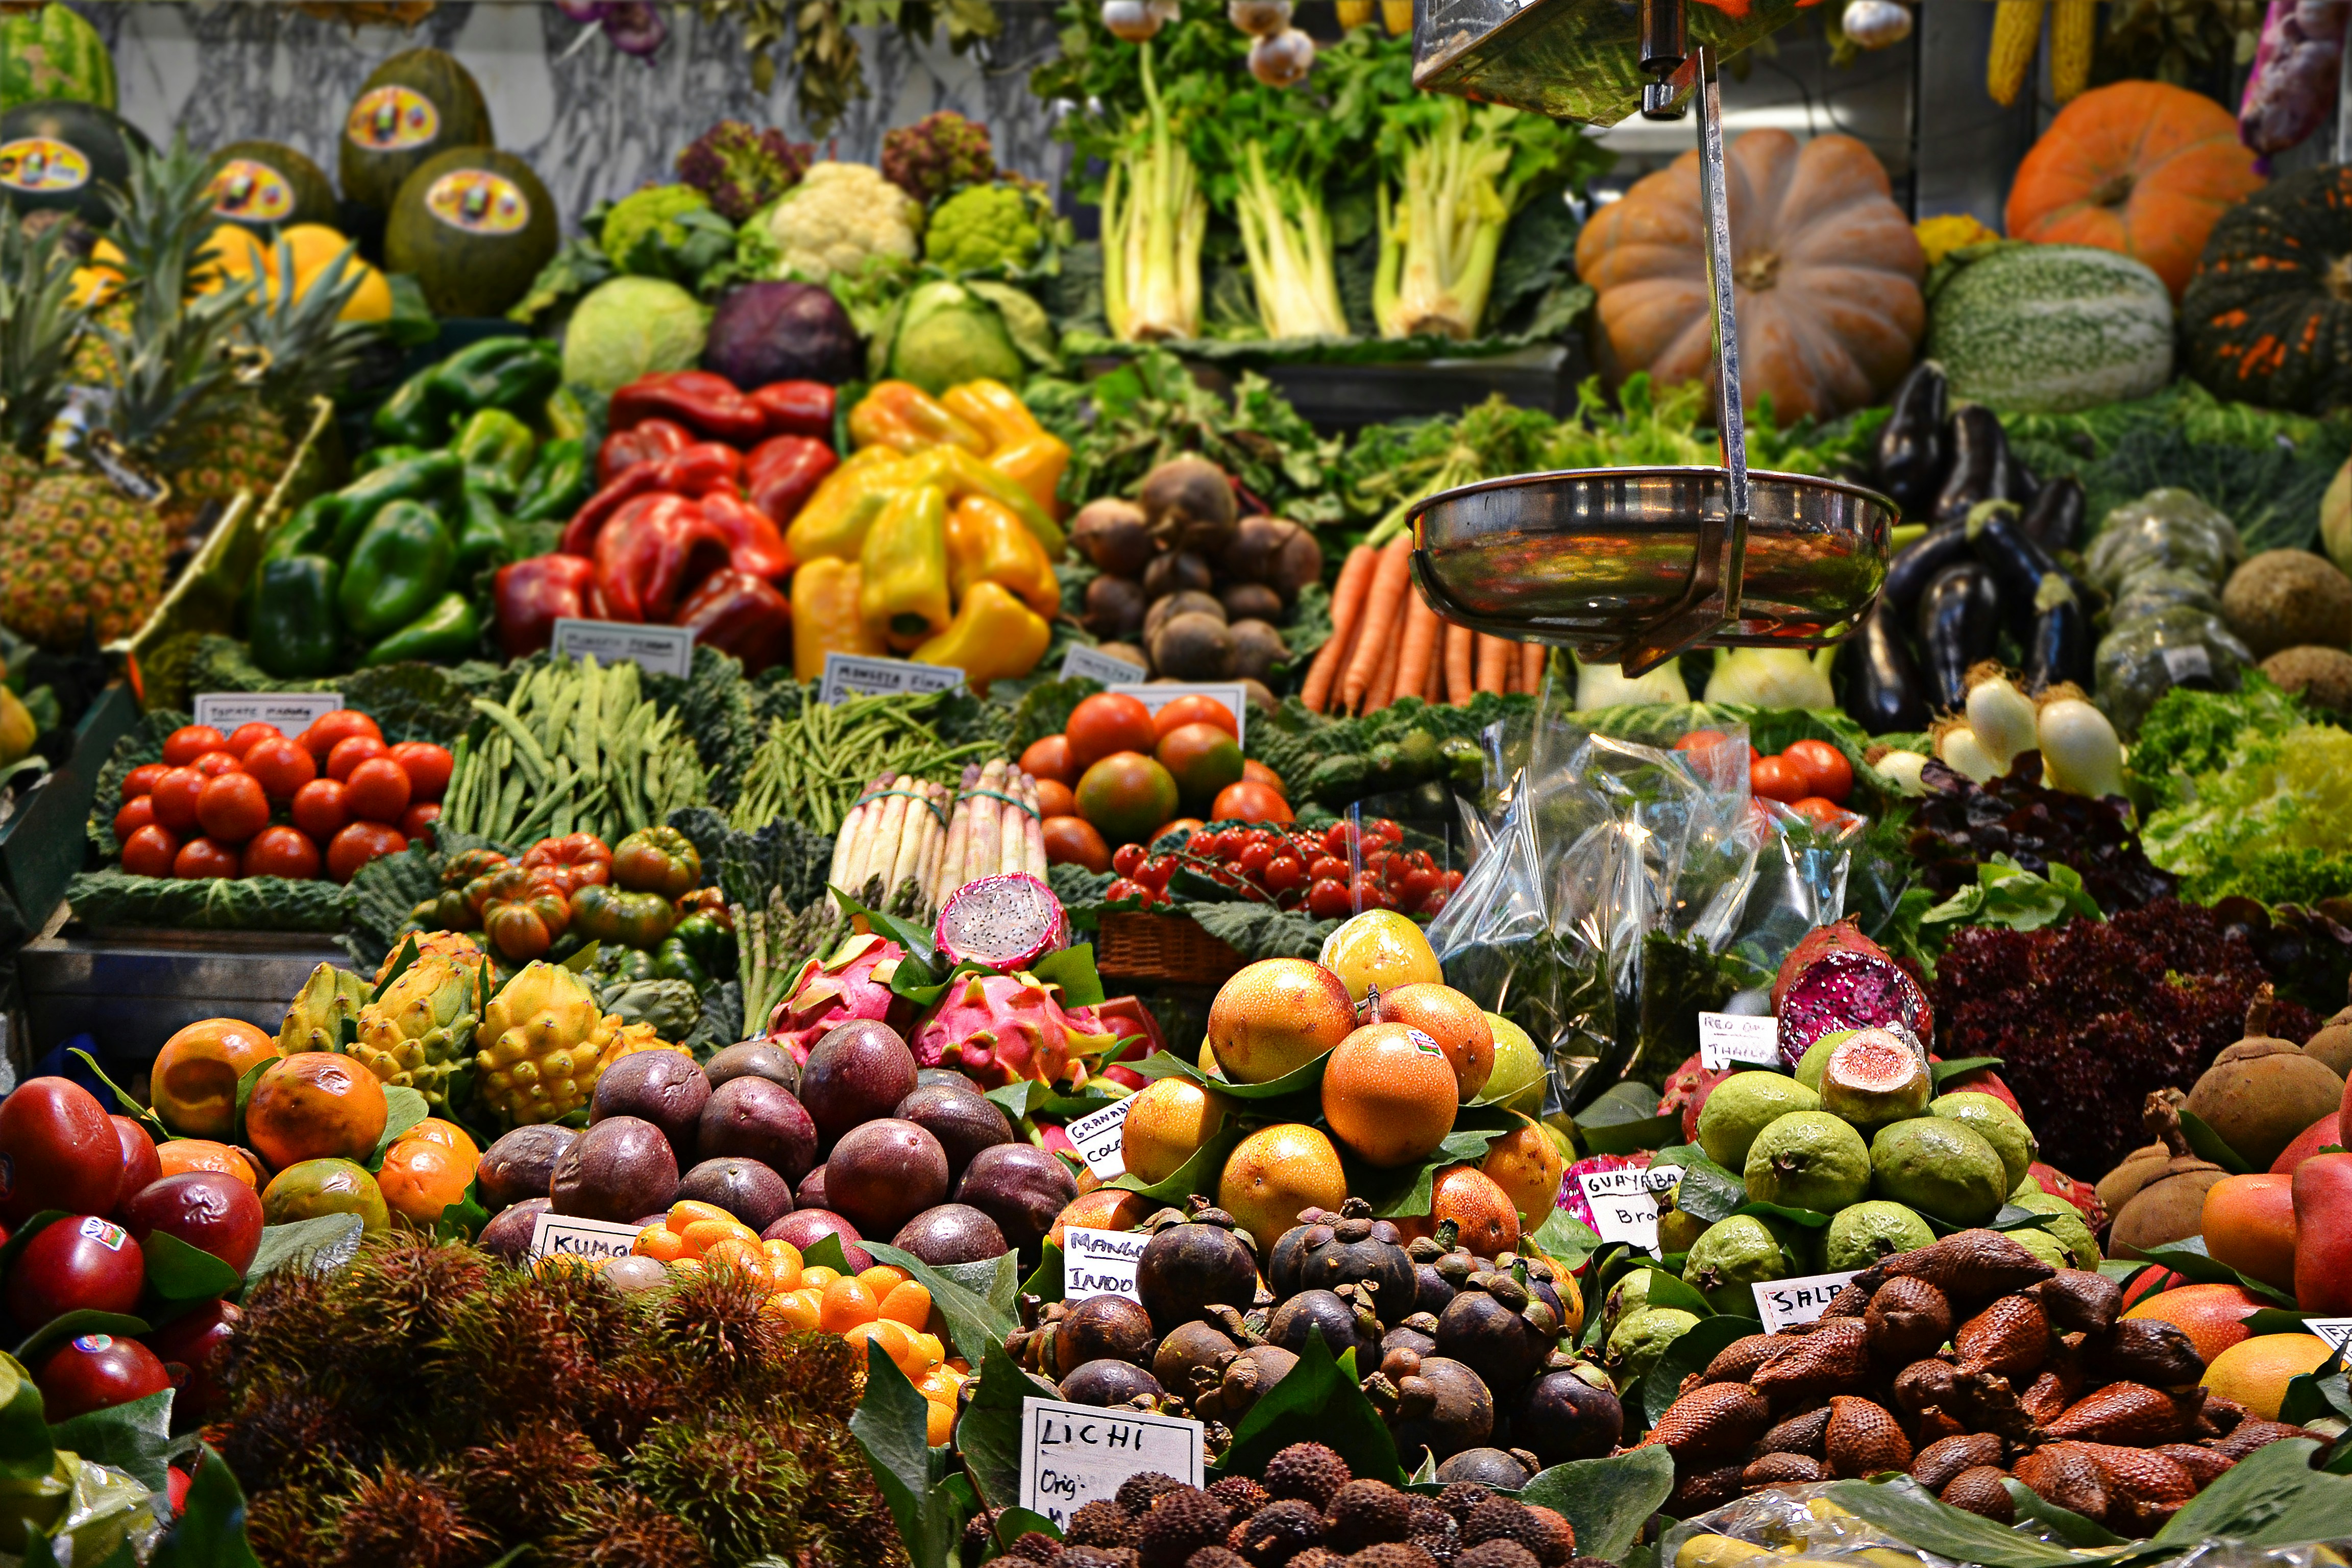 A colorful picture of various fruits and vegetables in a stall at Mercado de la Boqueria in Barcelona.